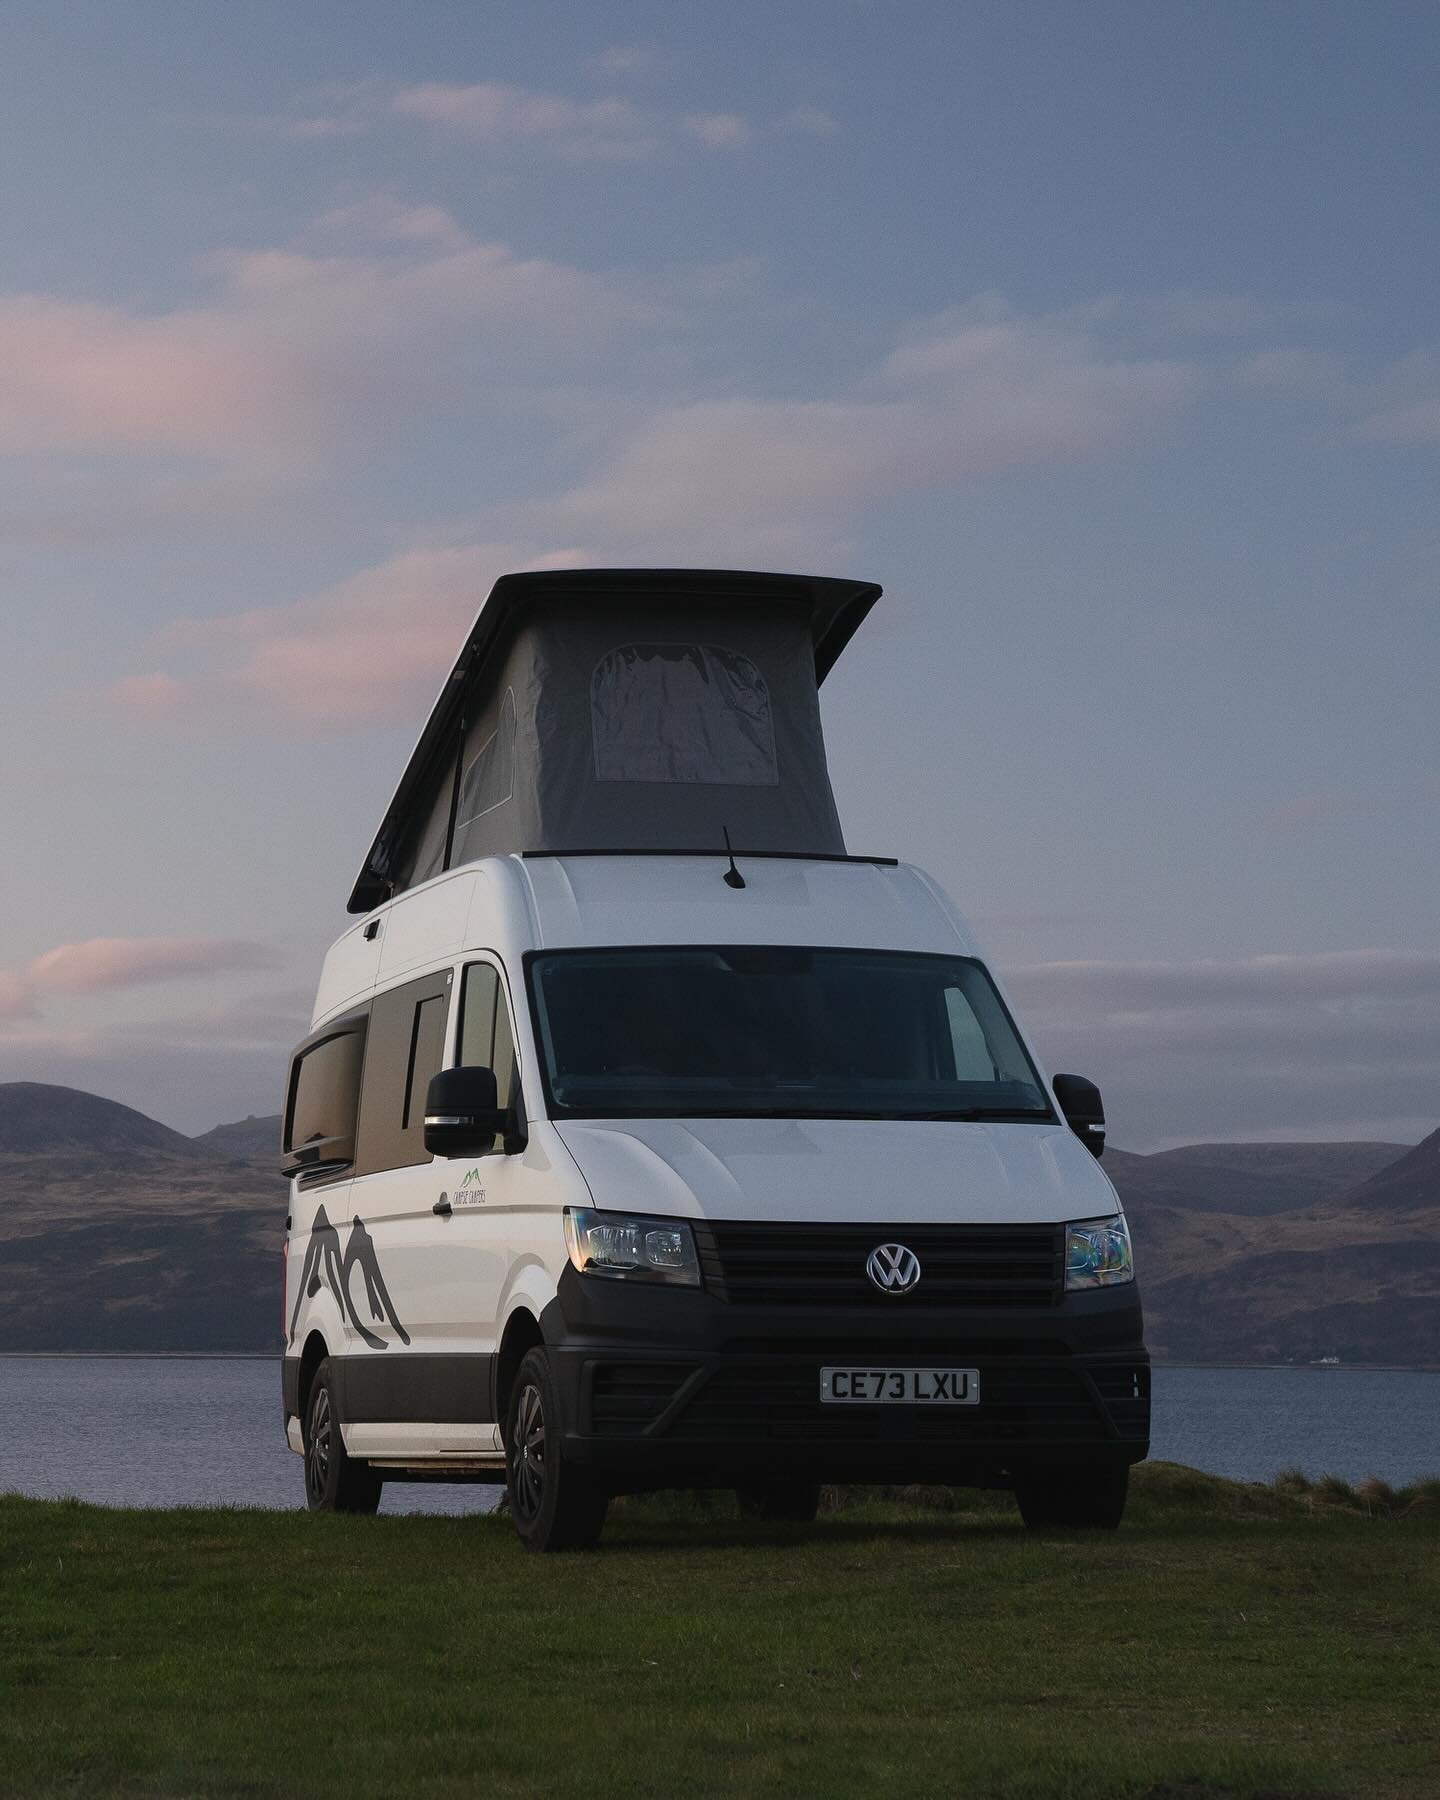 The perfect spot for an overnight stay.

Argyll is such an underrated gem in Scotland. The views overlooking the Isle of Arran were absolutely stunning. 

@campsiecampers 

#wildaboutargyll #vanlife #vanlifedreams #scotlandtravel #scotlandtrip